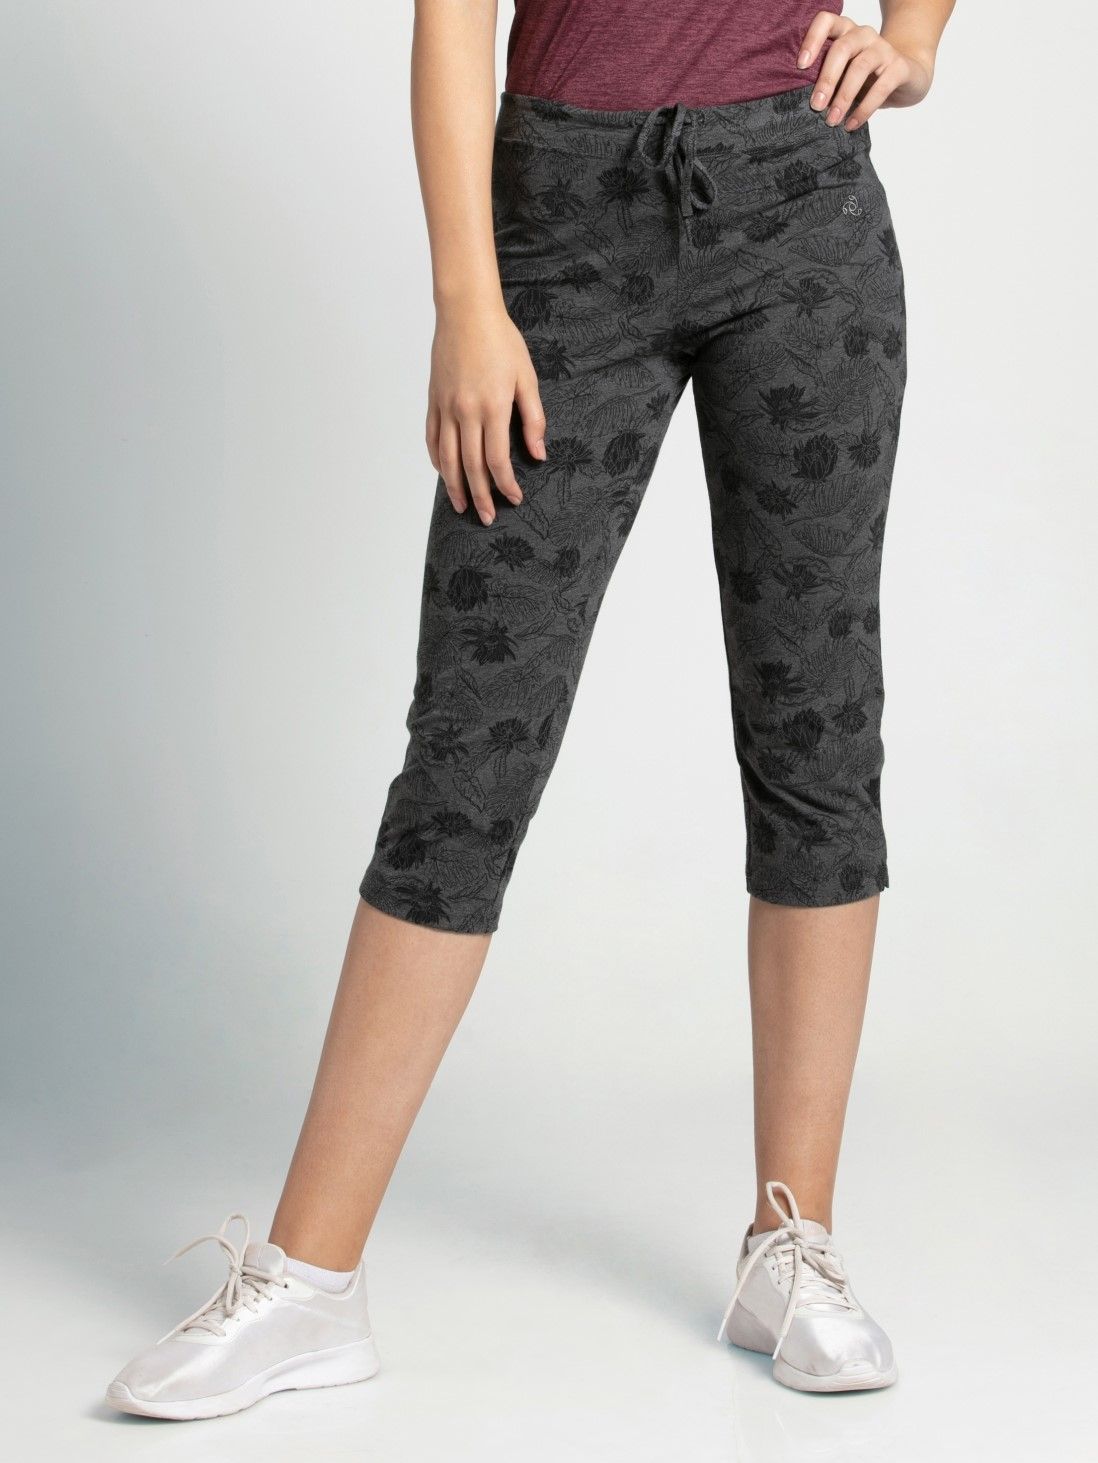 Floral Divergence Capri Printed Leggings by Chandra Yoga & Active Wear